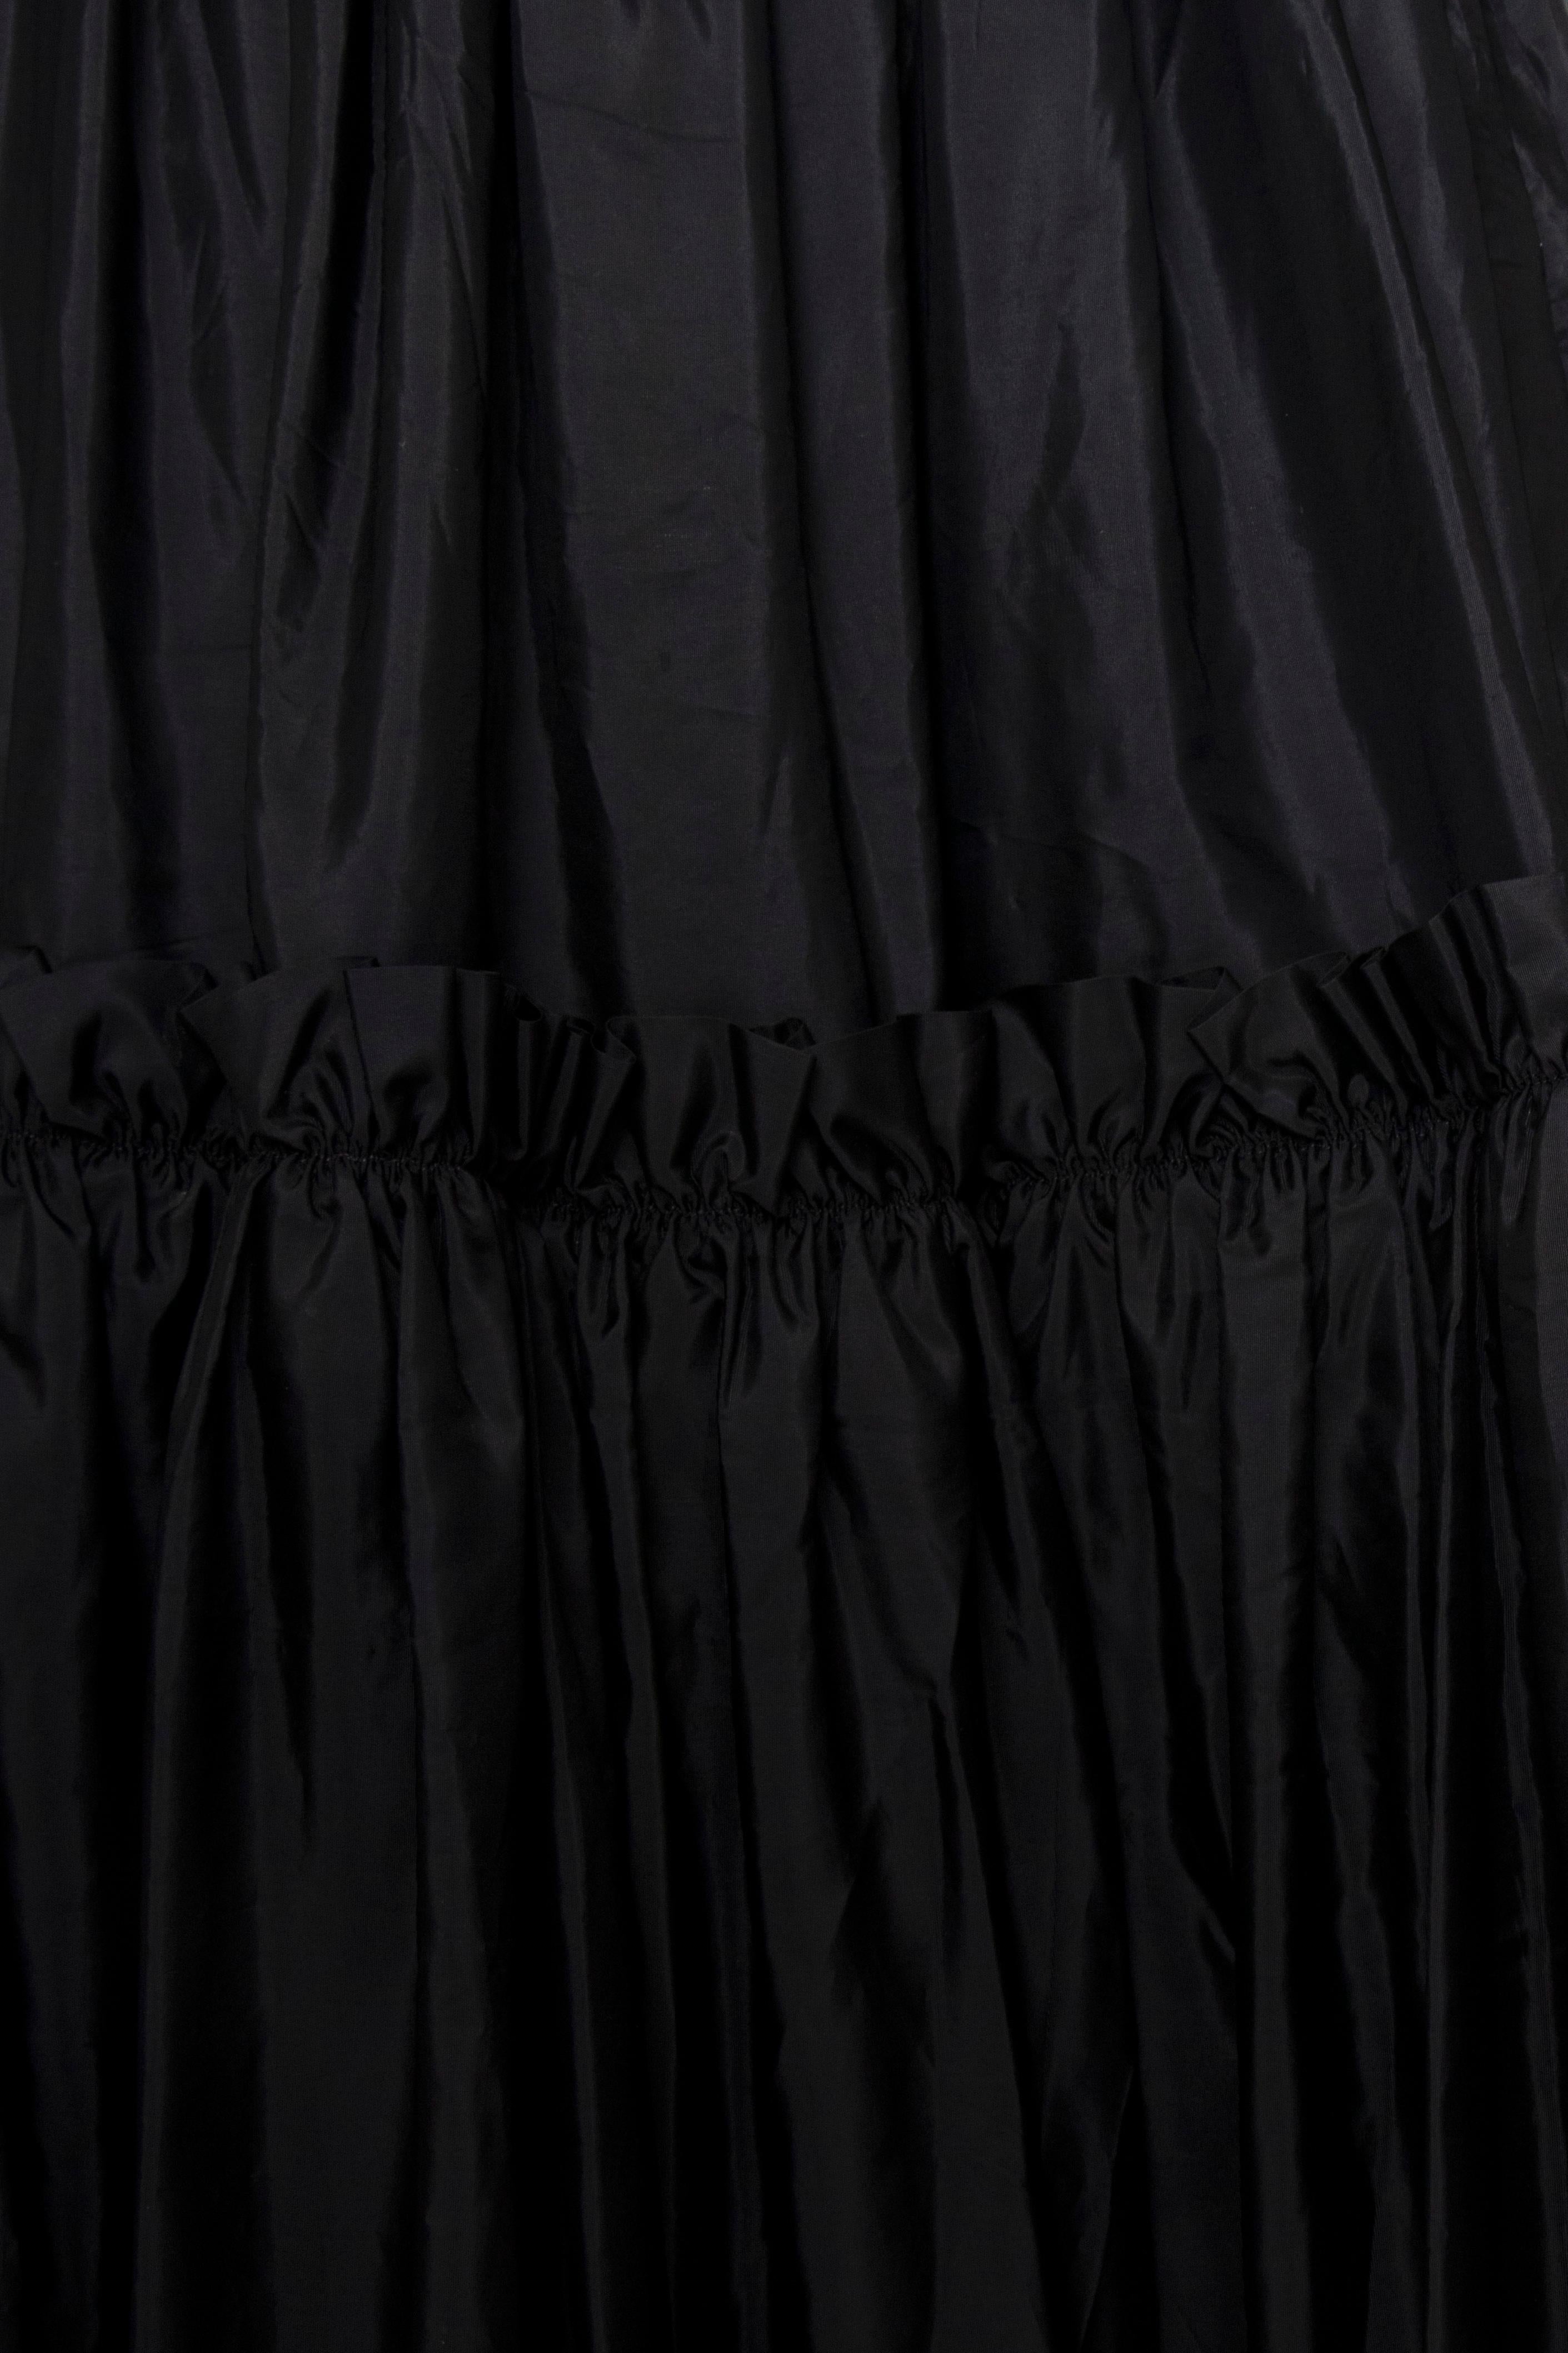 A 1980s Vintage Yves Saint Laurent Rive Gauche floor-length black silk taffeta skirt with a fitted waist, zipper closure and gorgeous ruffled trimmed layers. The skirt is unlined. 

The size of the skirt corresponds to a modern size Small, but